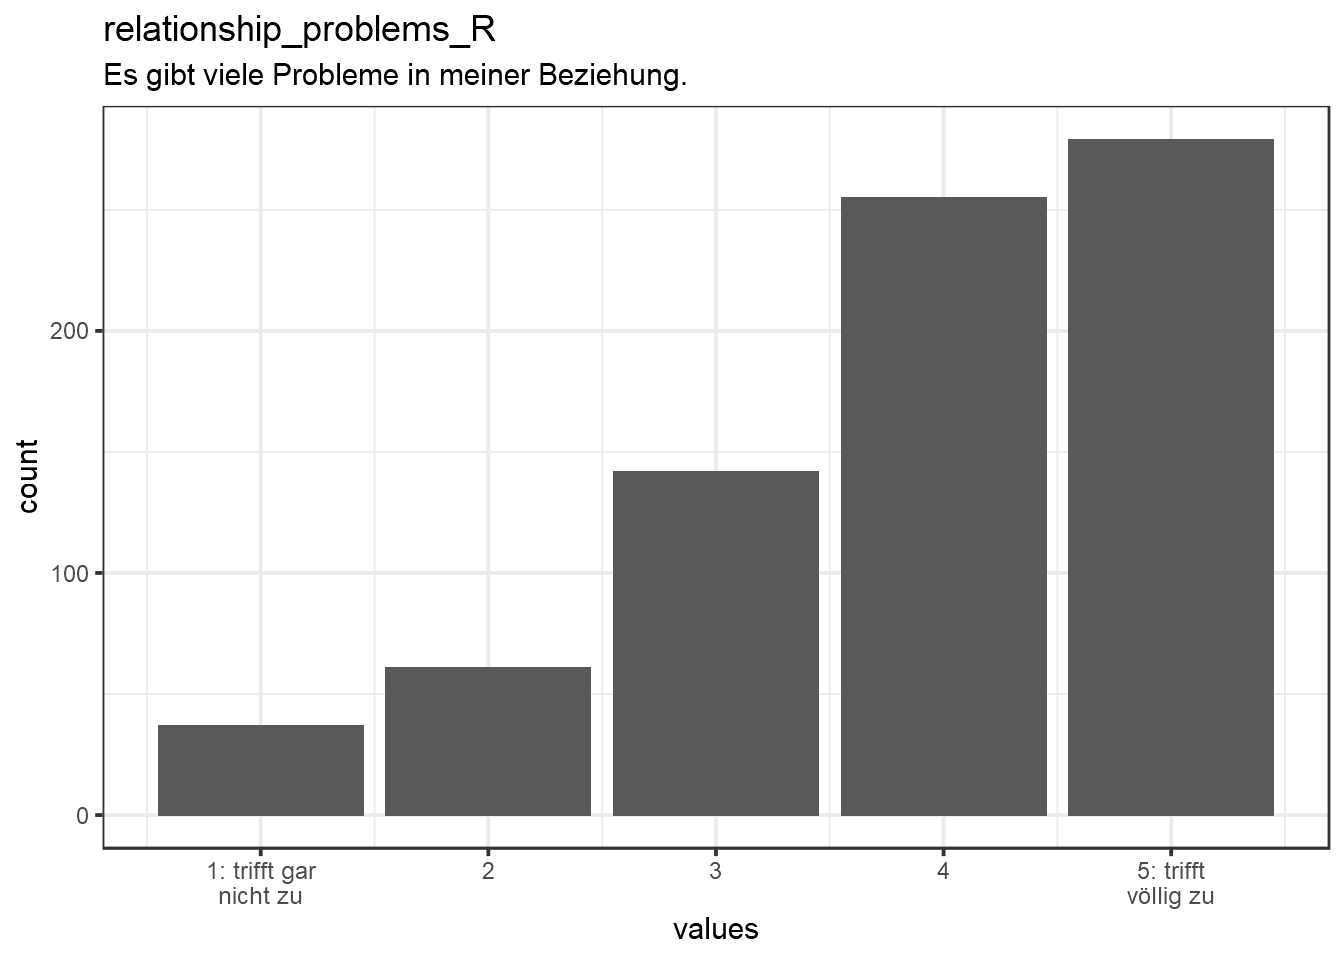 Distribution of values for relationship_problems_R